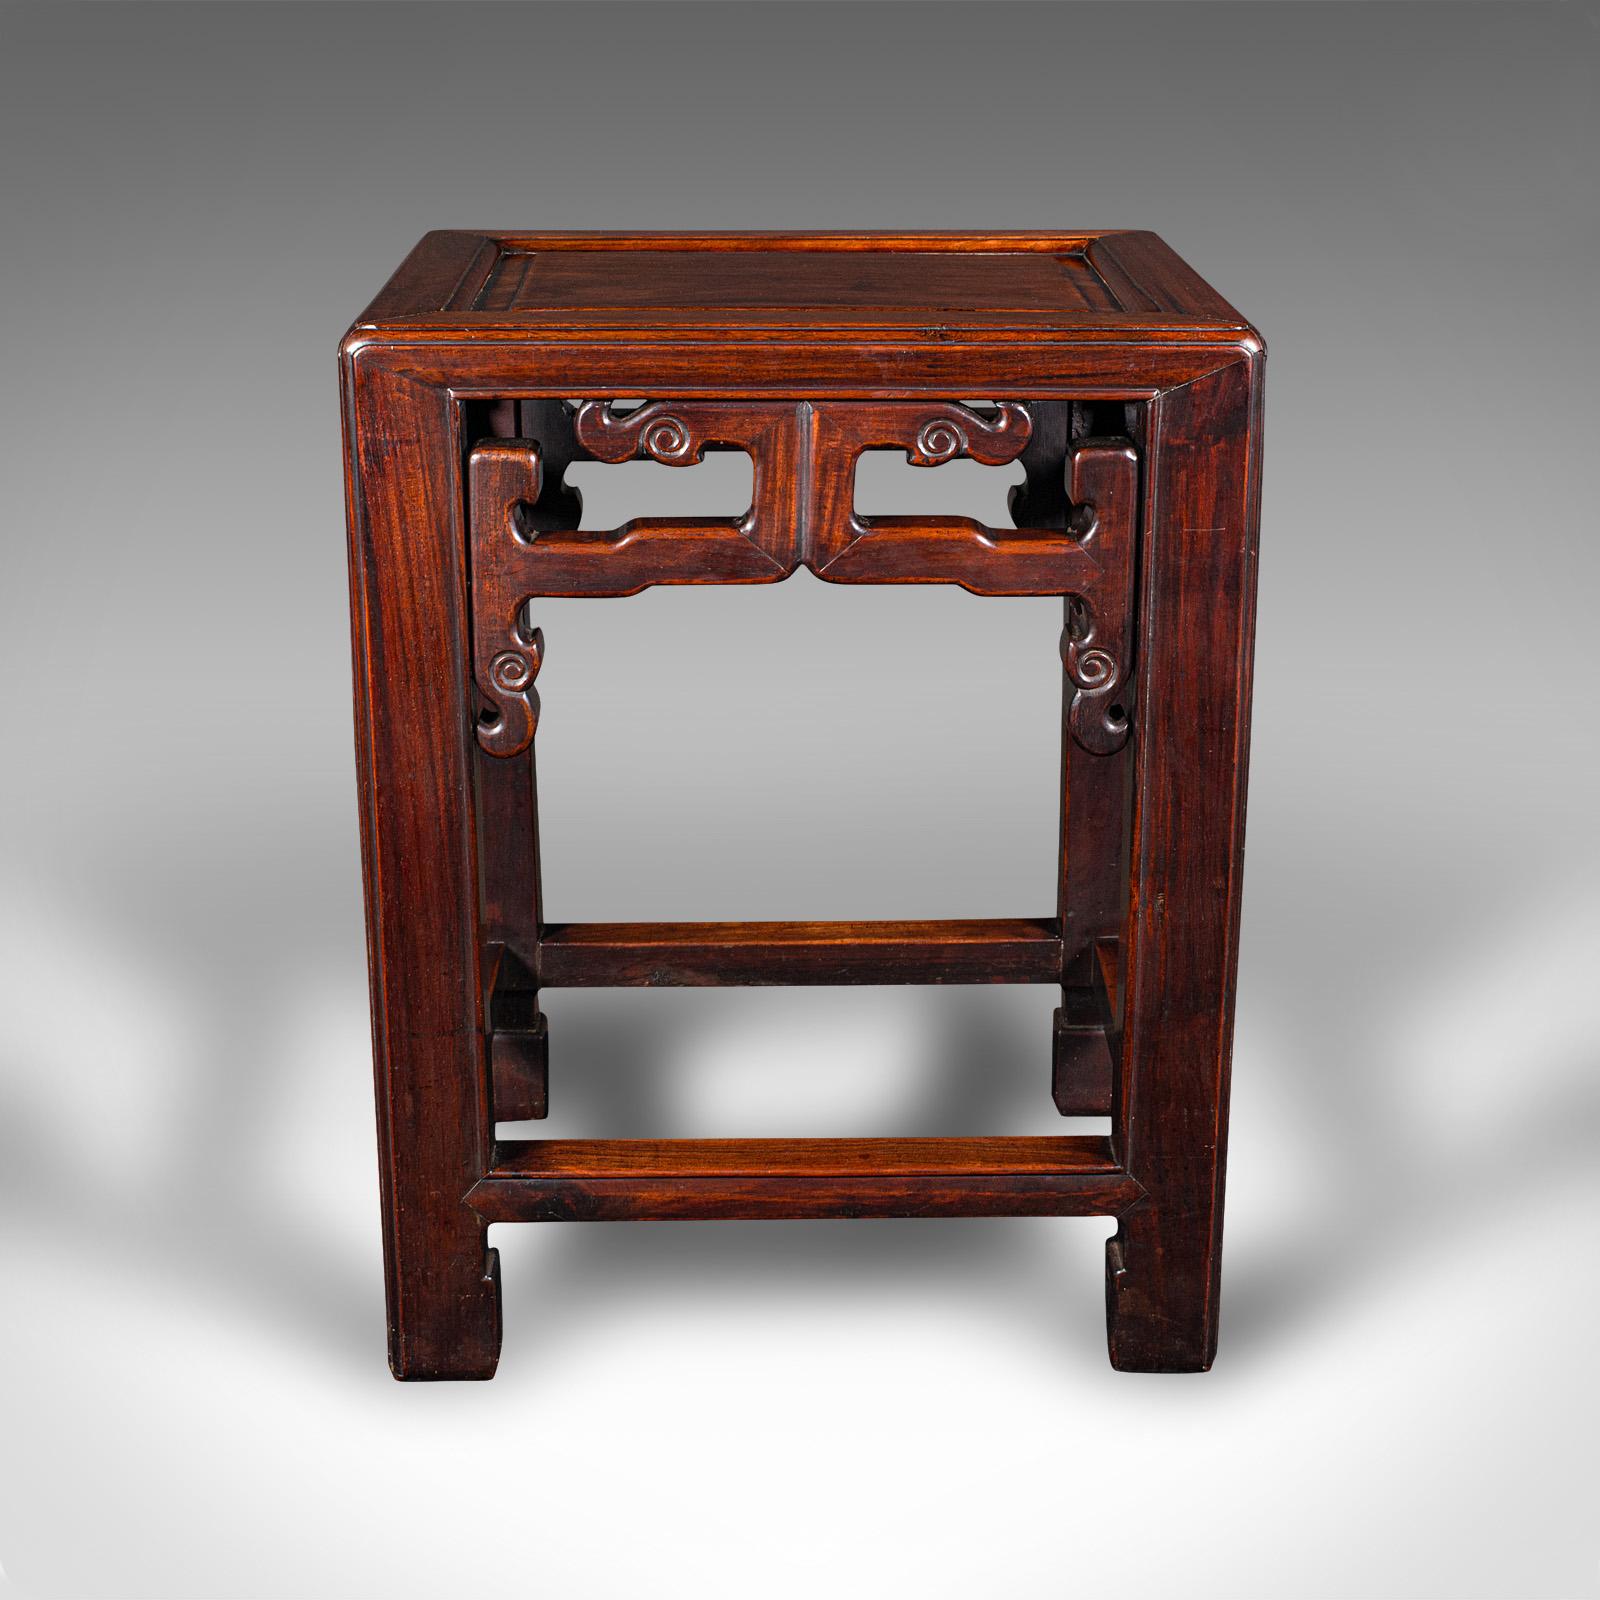 British Antique Occasional Table, Chinese, Lamp, Jardiniere Stand, Victorian, Circa 1900 For Sale